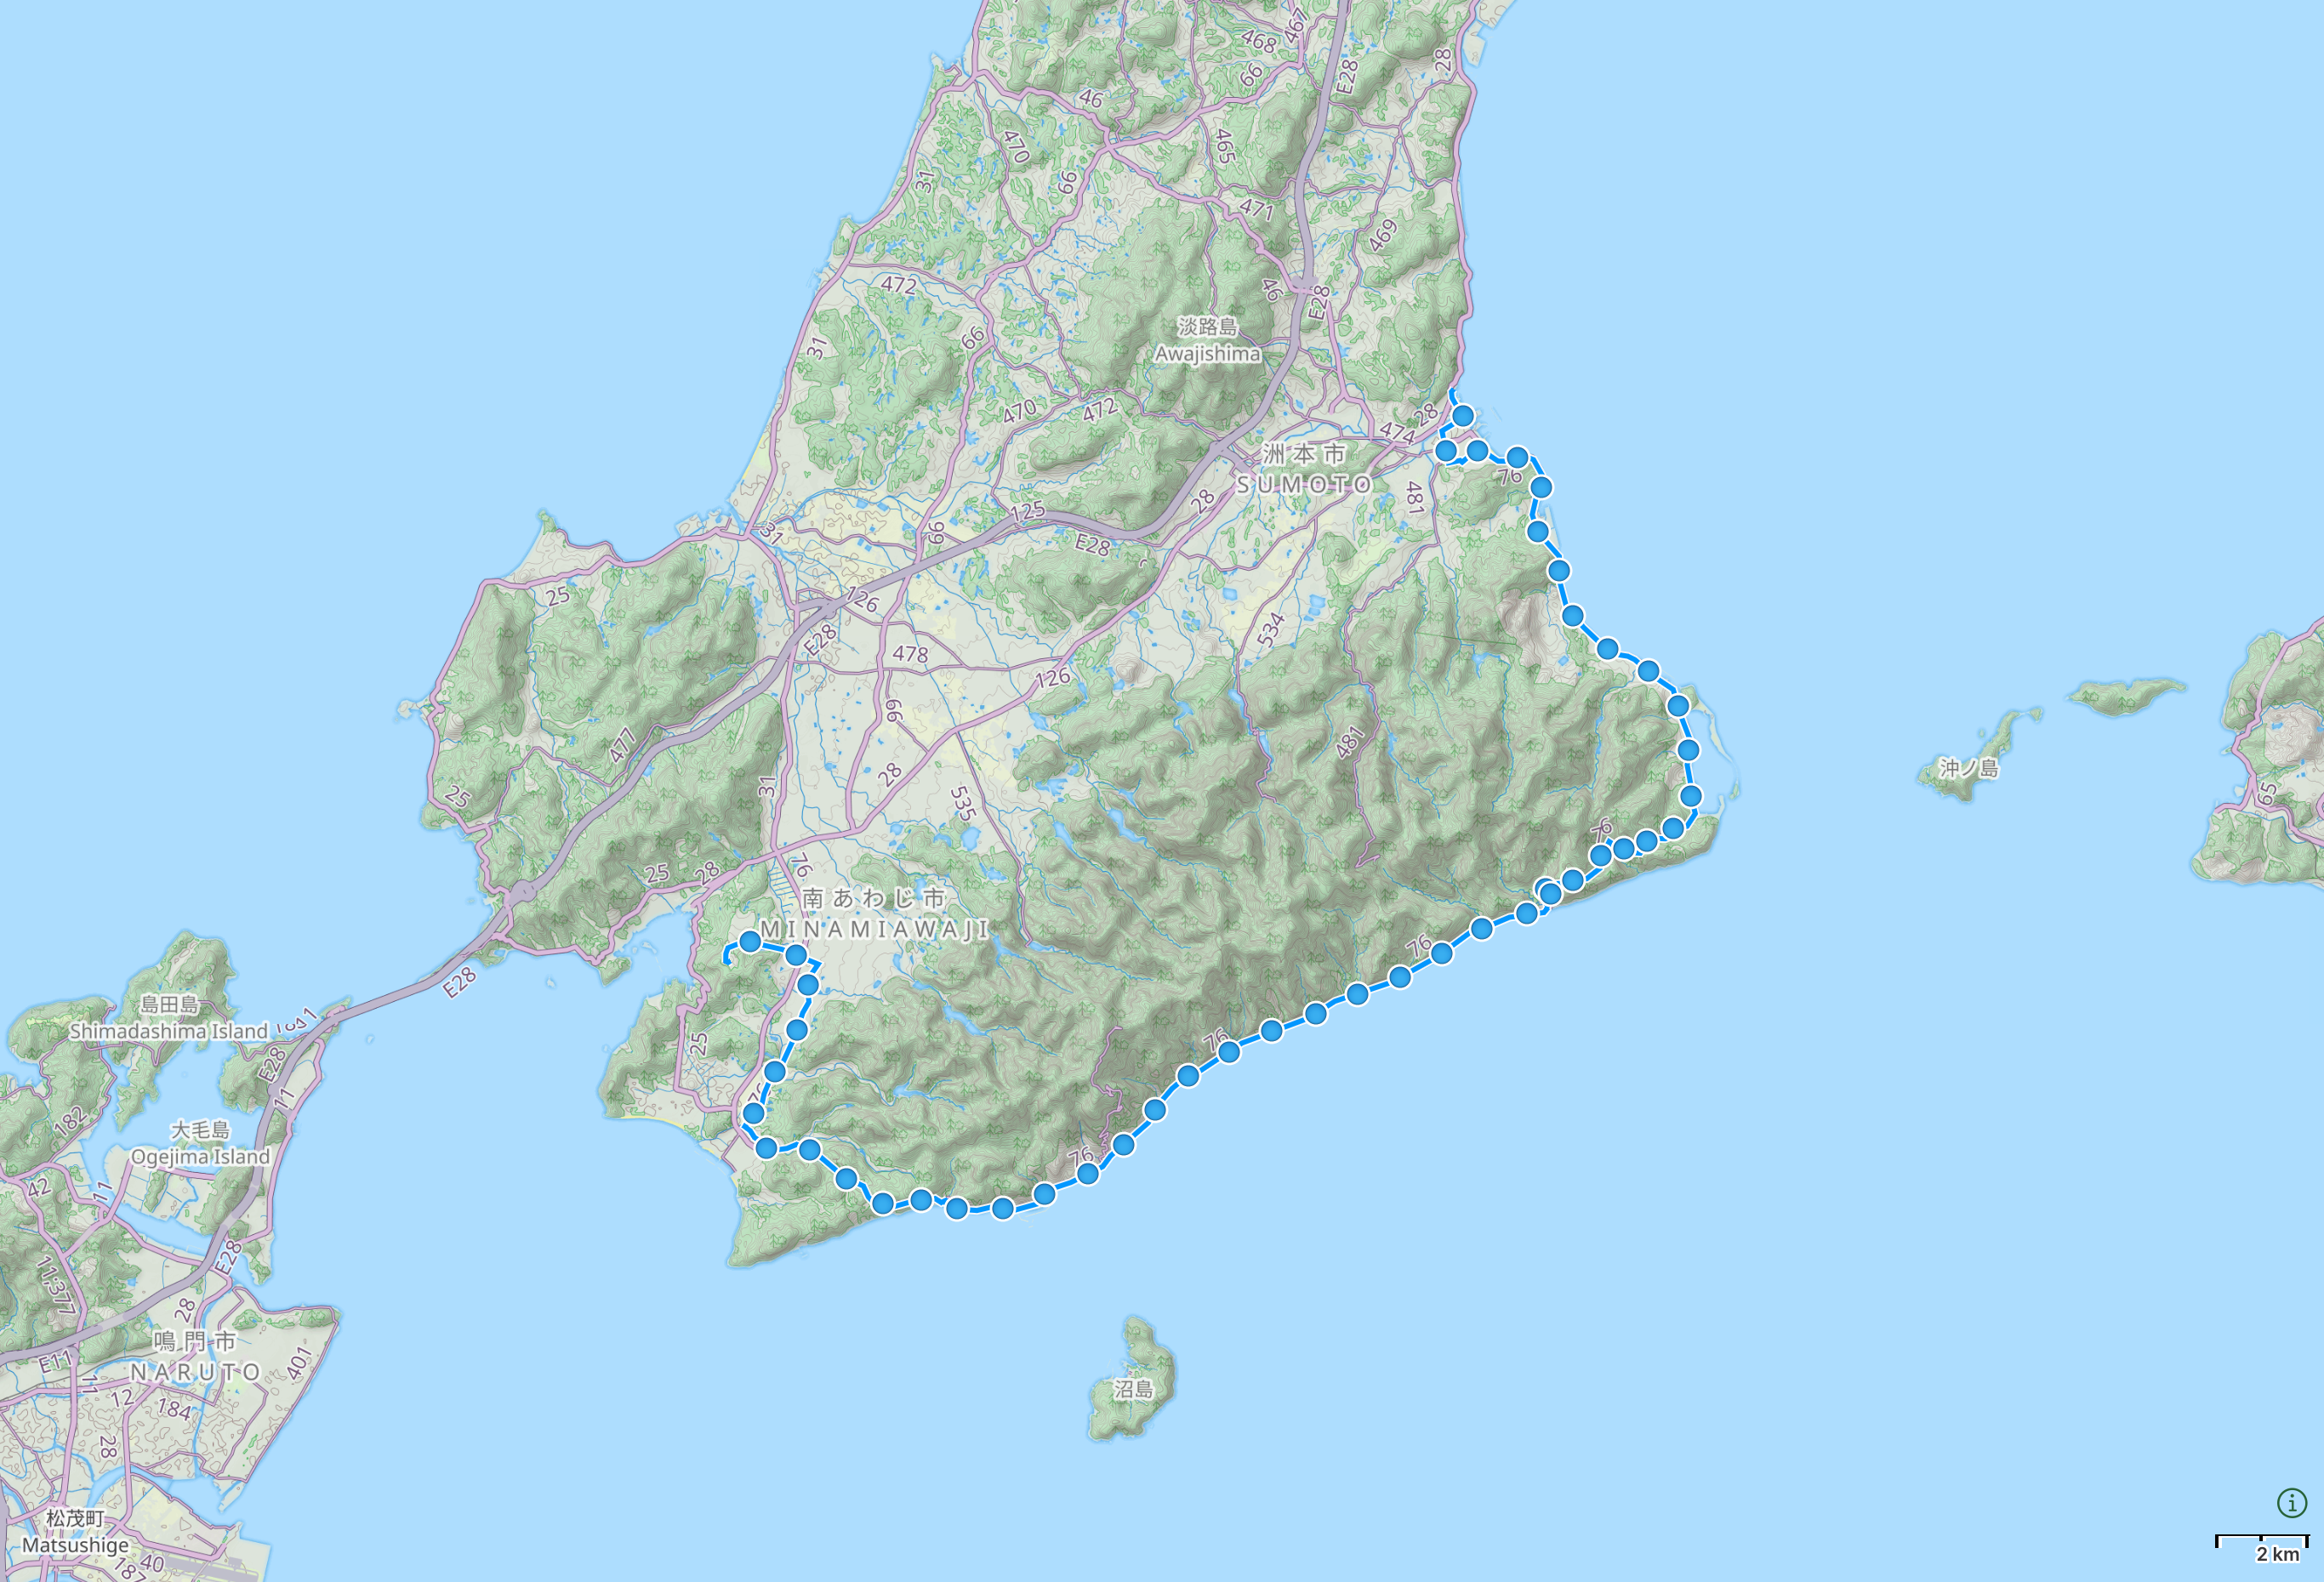 Map of Awaji Island in Hyōgo Prefecture with author’s route between South Awaji City and Sumoto highlighted.